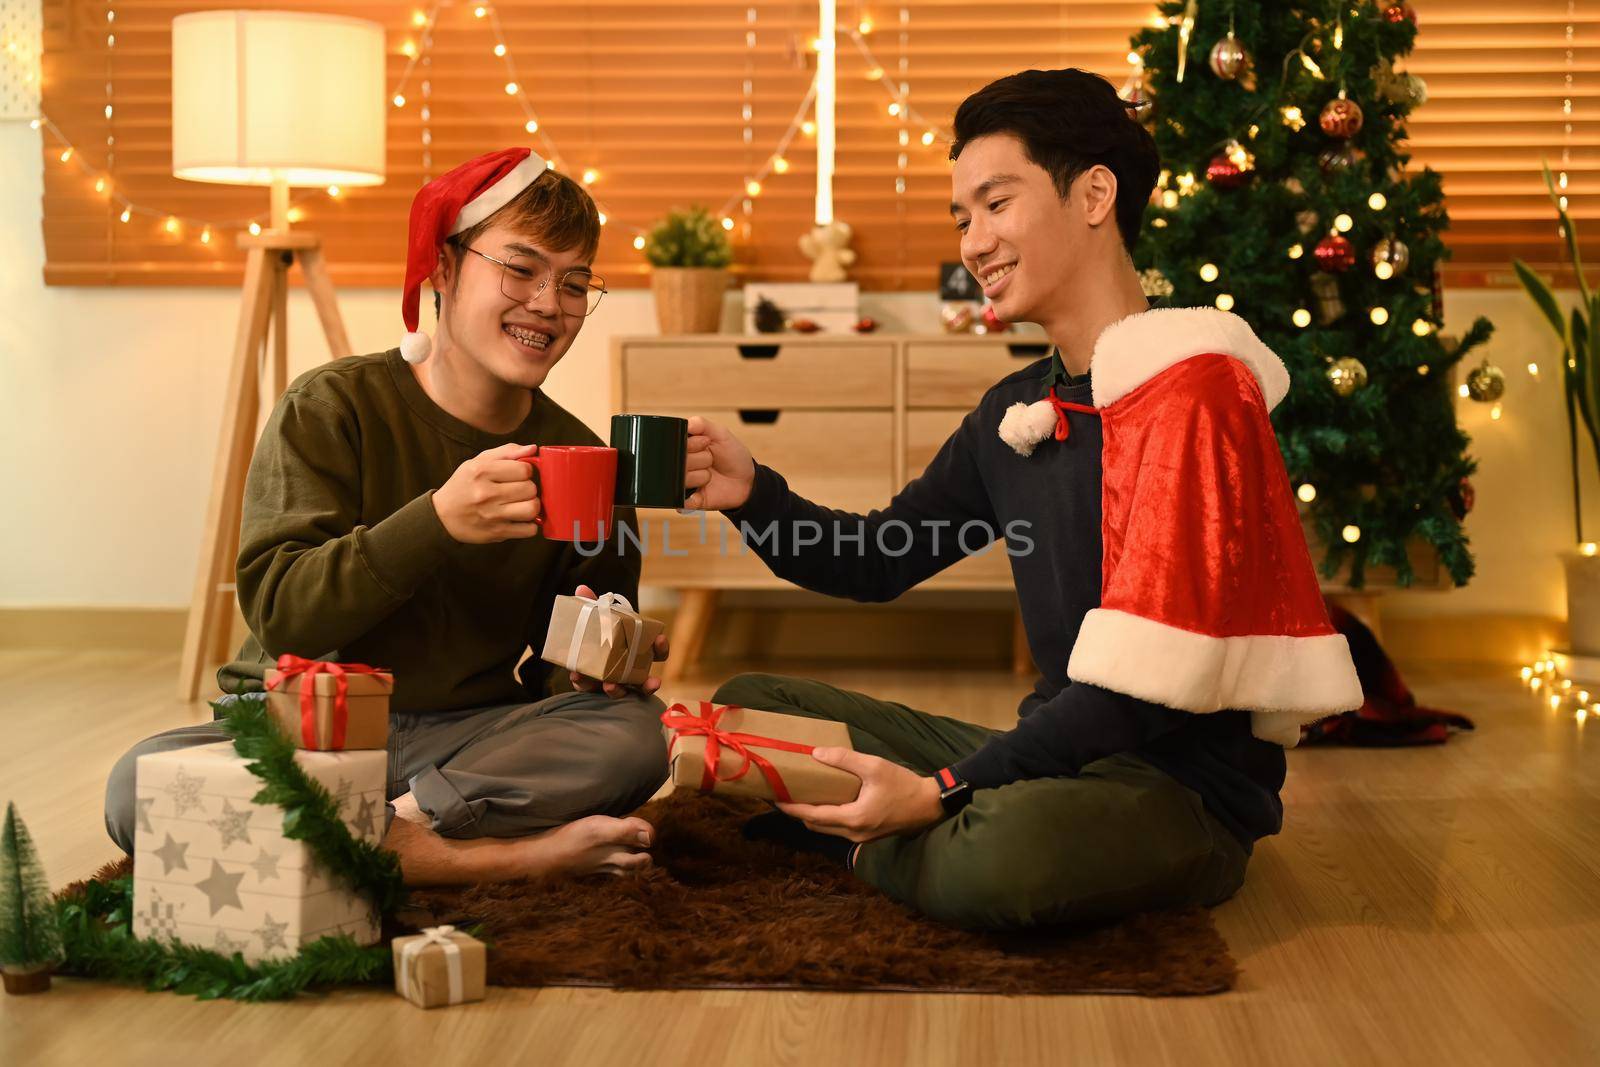 Two happy man next to a decorated Christmas tree and enjoying drinking hot chocolate together by prathanchorruangsak